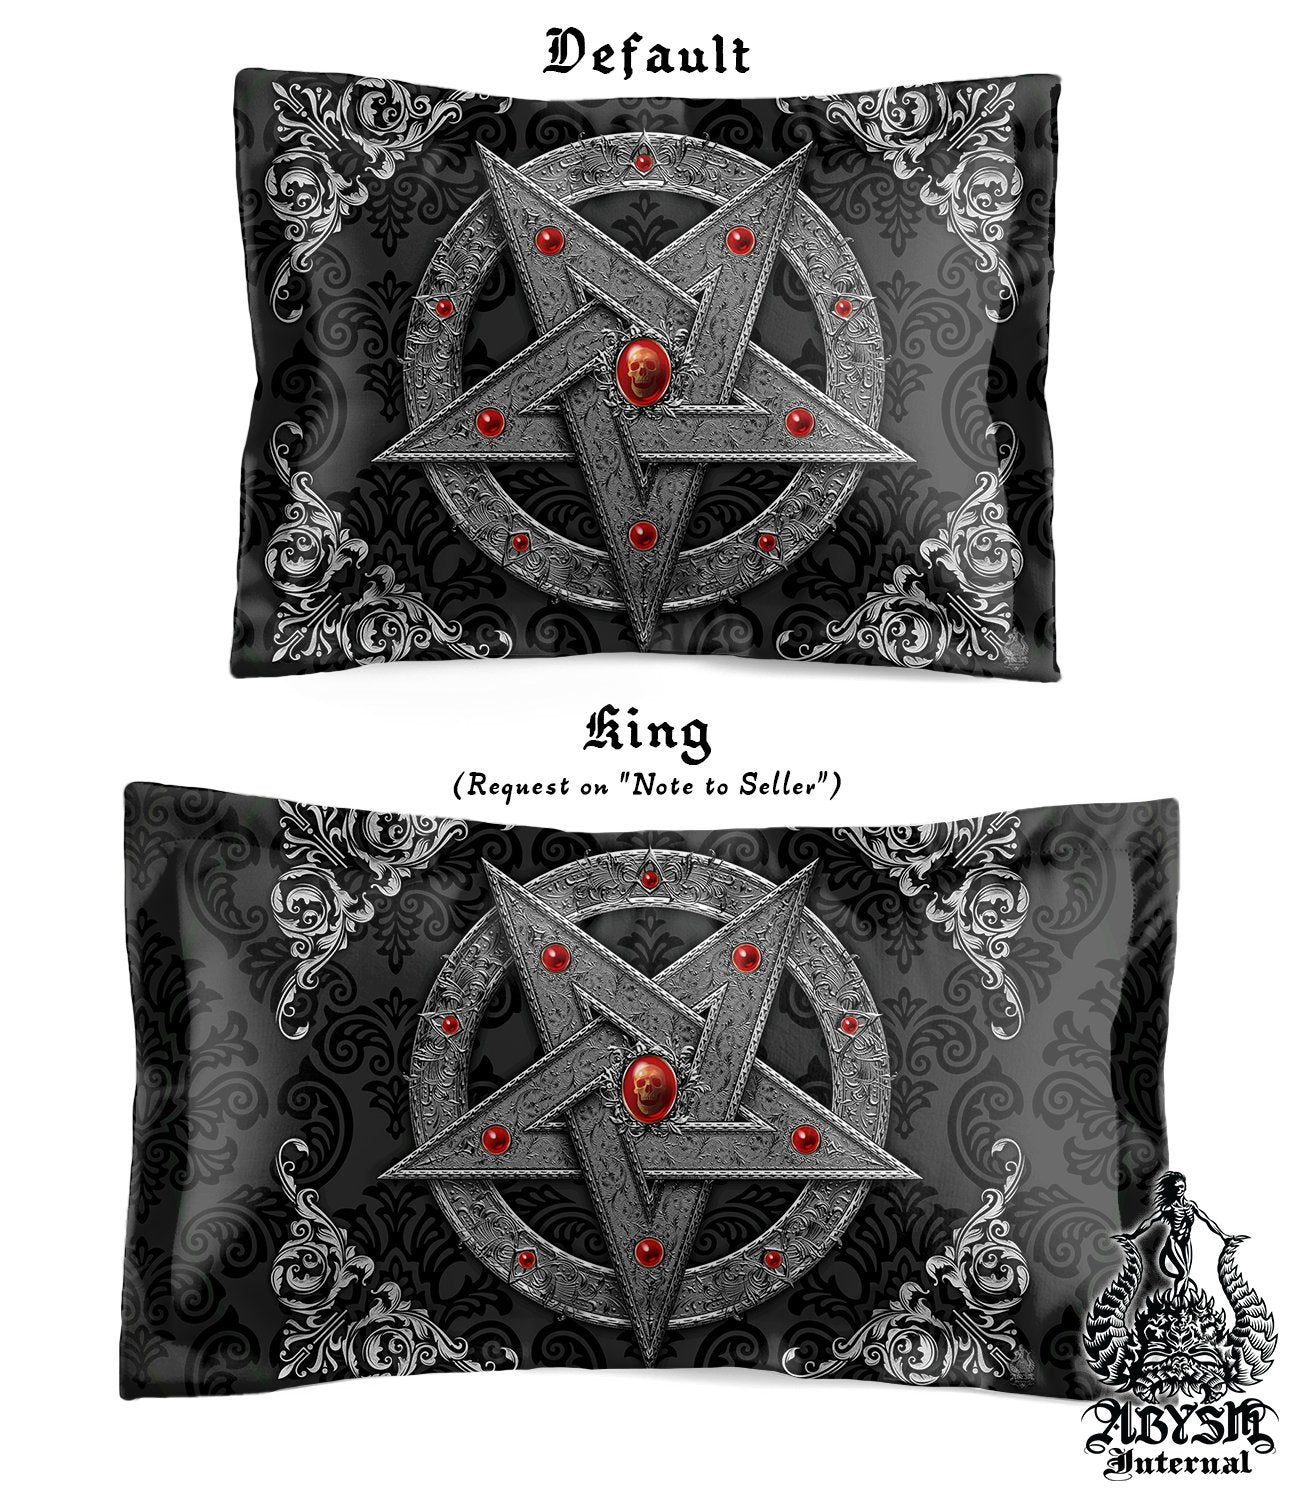 Pentagram Bedding Set, Comforter and Duvet, Gothic Bed Cover and Bedroom Decor, King, Queen and Twin Size - Silver - Abysm Internal